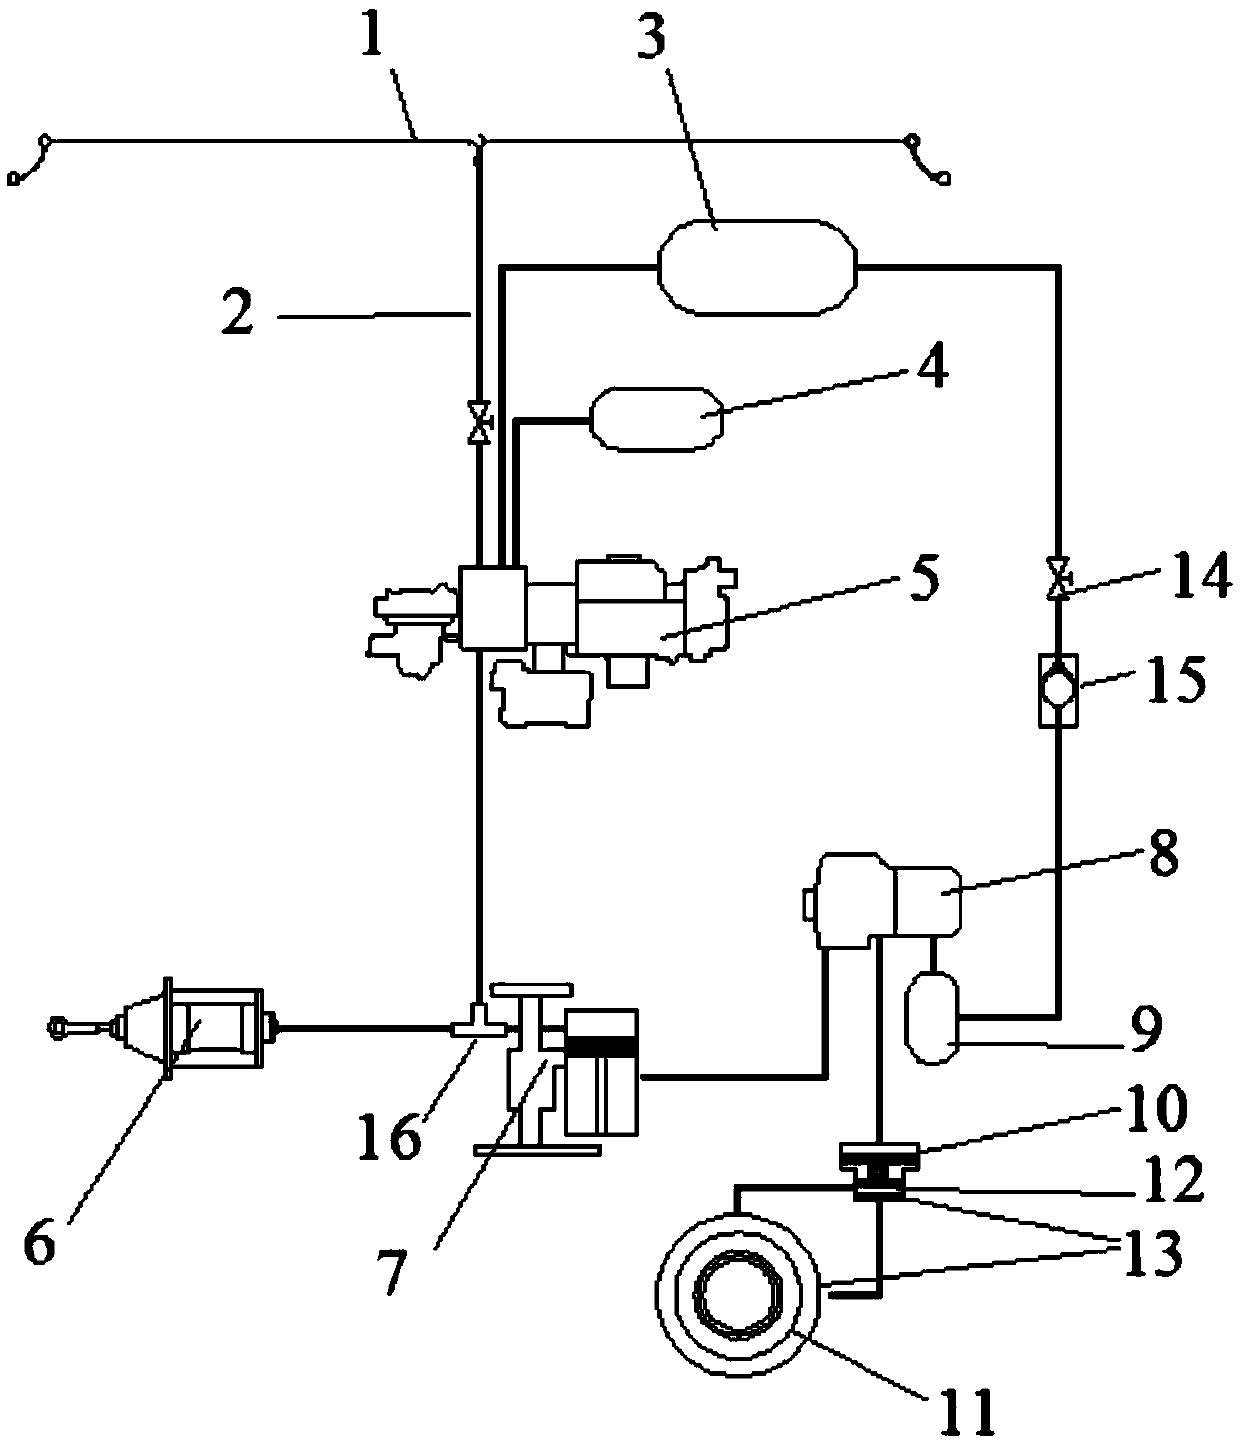 Braking system for freight train